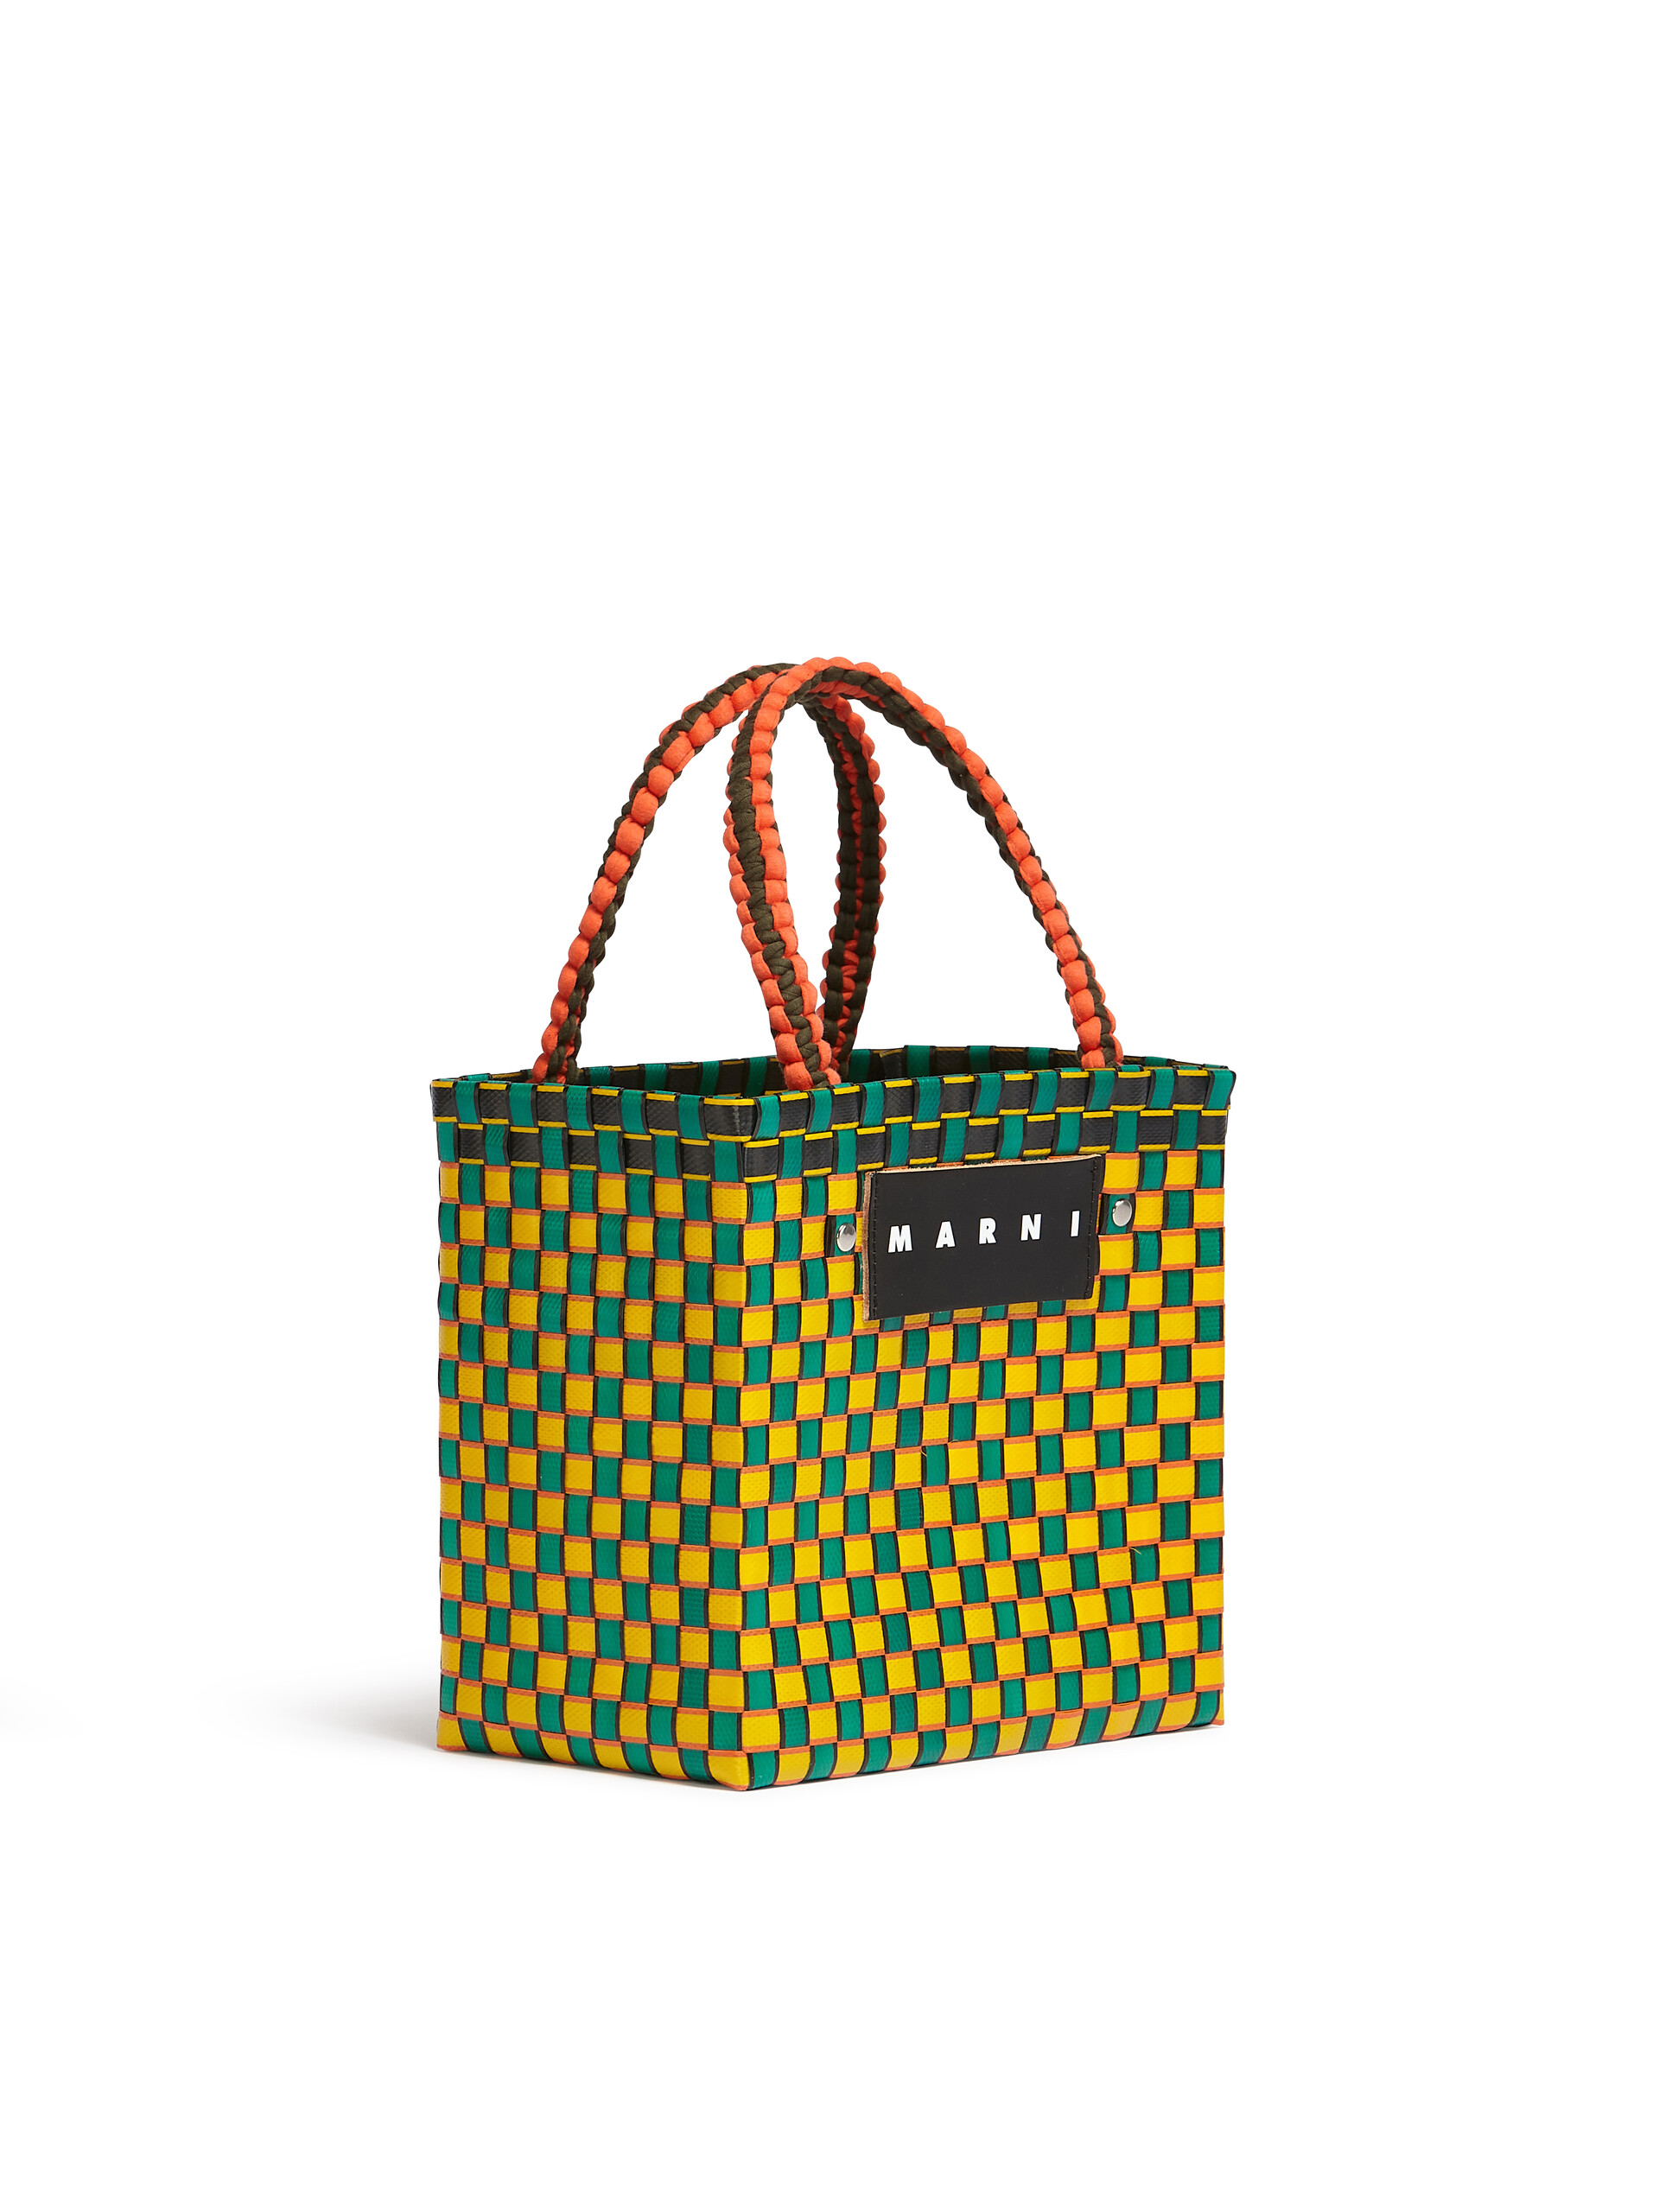 MARNI MARKET BASKET bag in yellow square woven material - Bags - Image 2